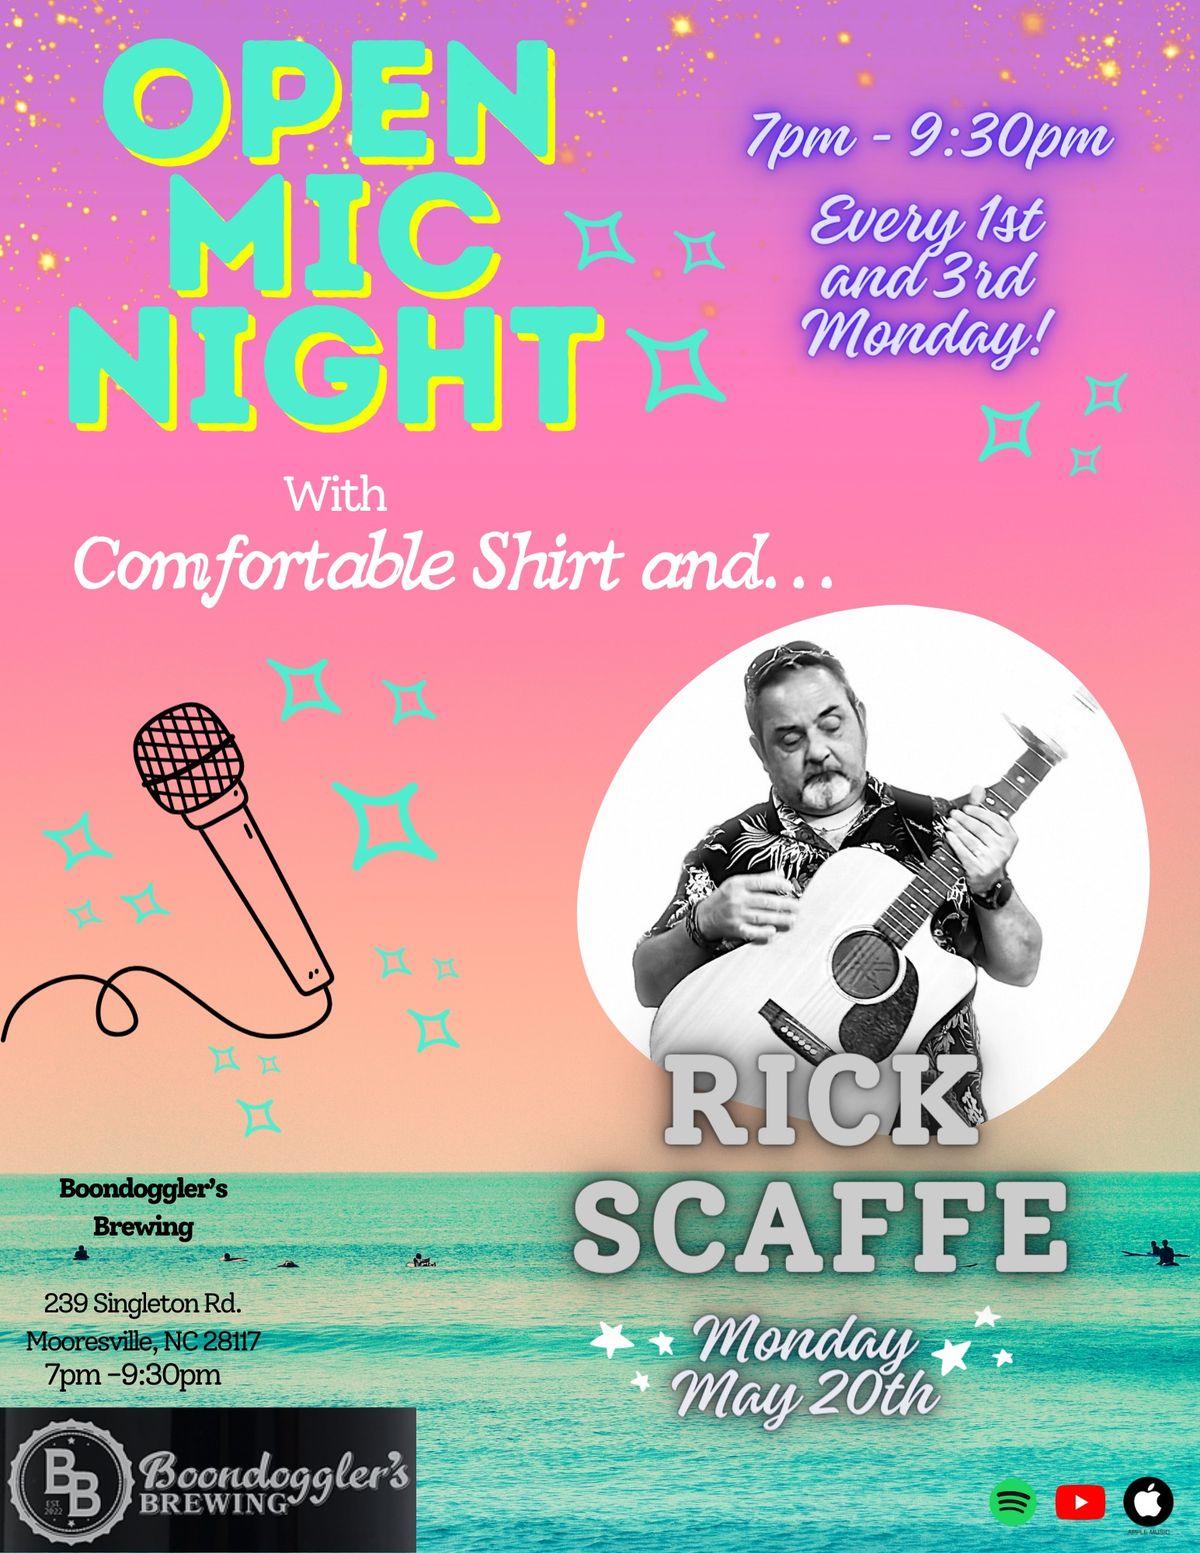 Open Mic at Boondoggler's Brewing: Featuring Rick Scaffe!